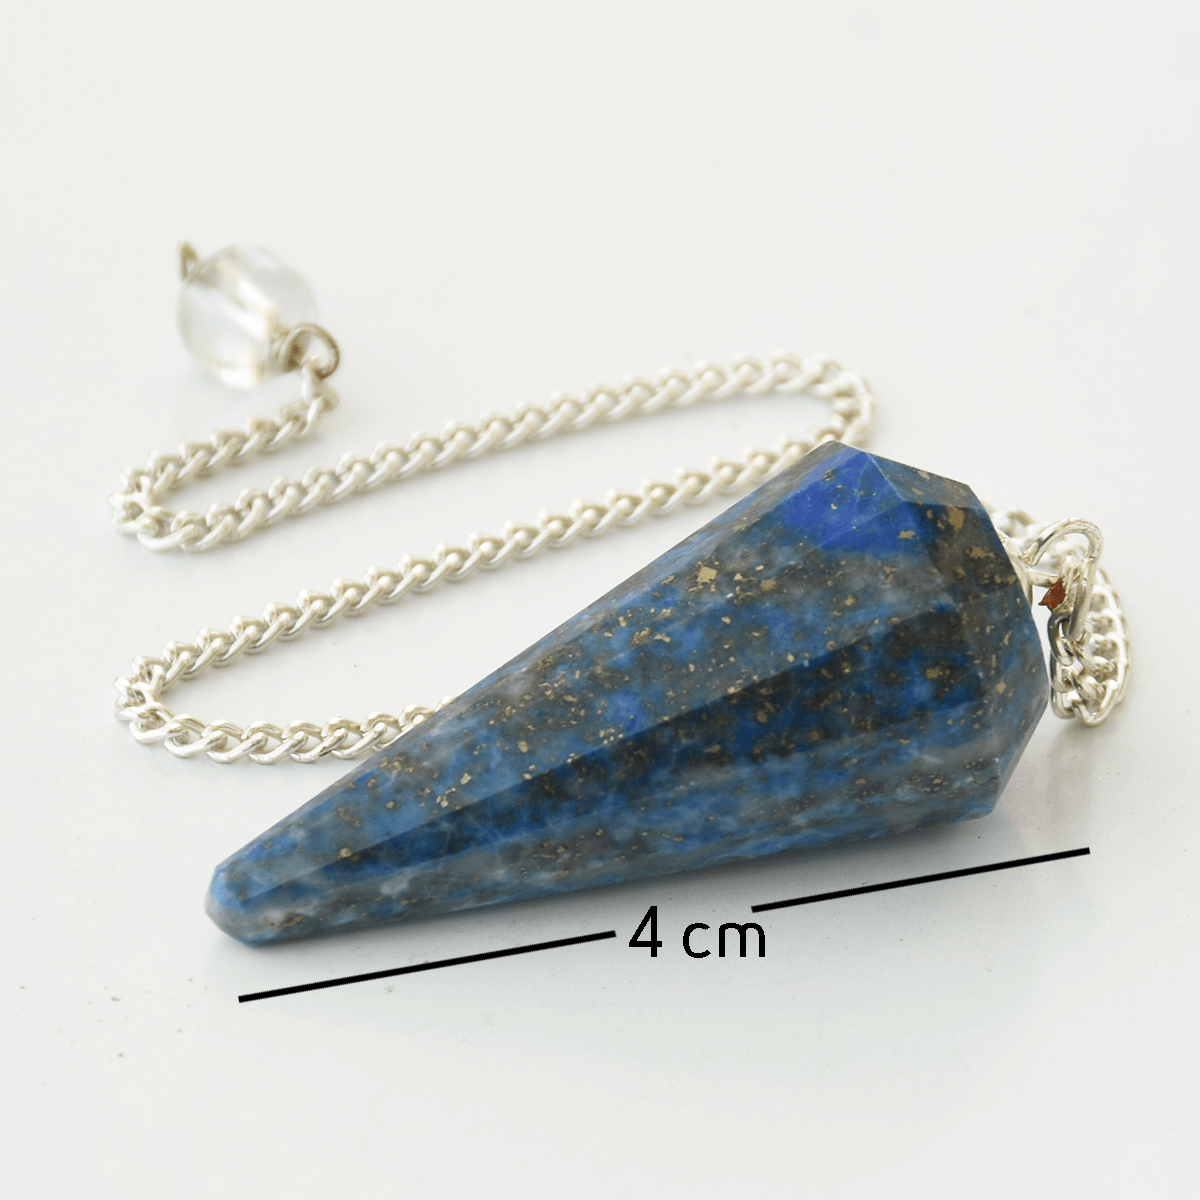 Lapis Lazuli Douser Pendulum with Chain for Check of Speech Issue, Reiki Healing for Stammering, Clear voice, Throat chakra, Communication and other Guidance.